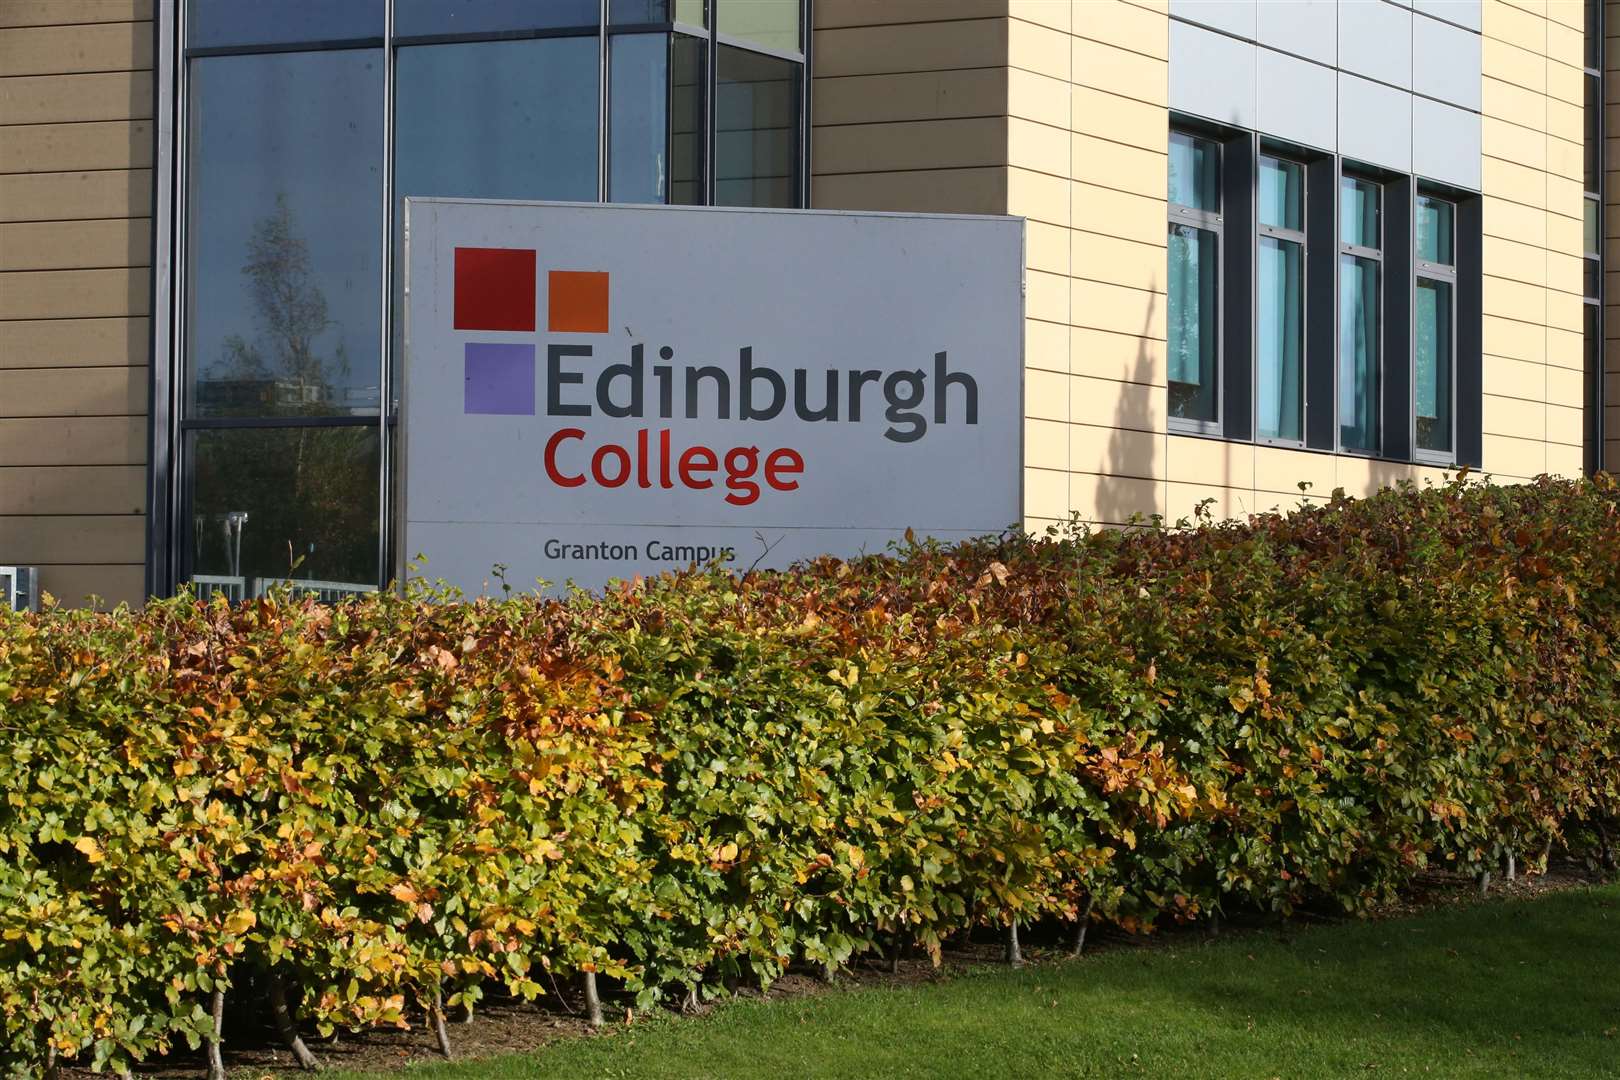 Friel stabbed a police officer at Edinburgh College’s campus in Granton (Jane Barlow/PA)